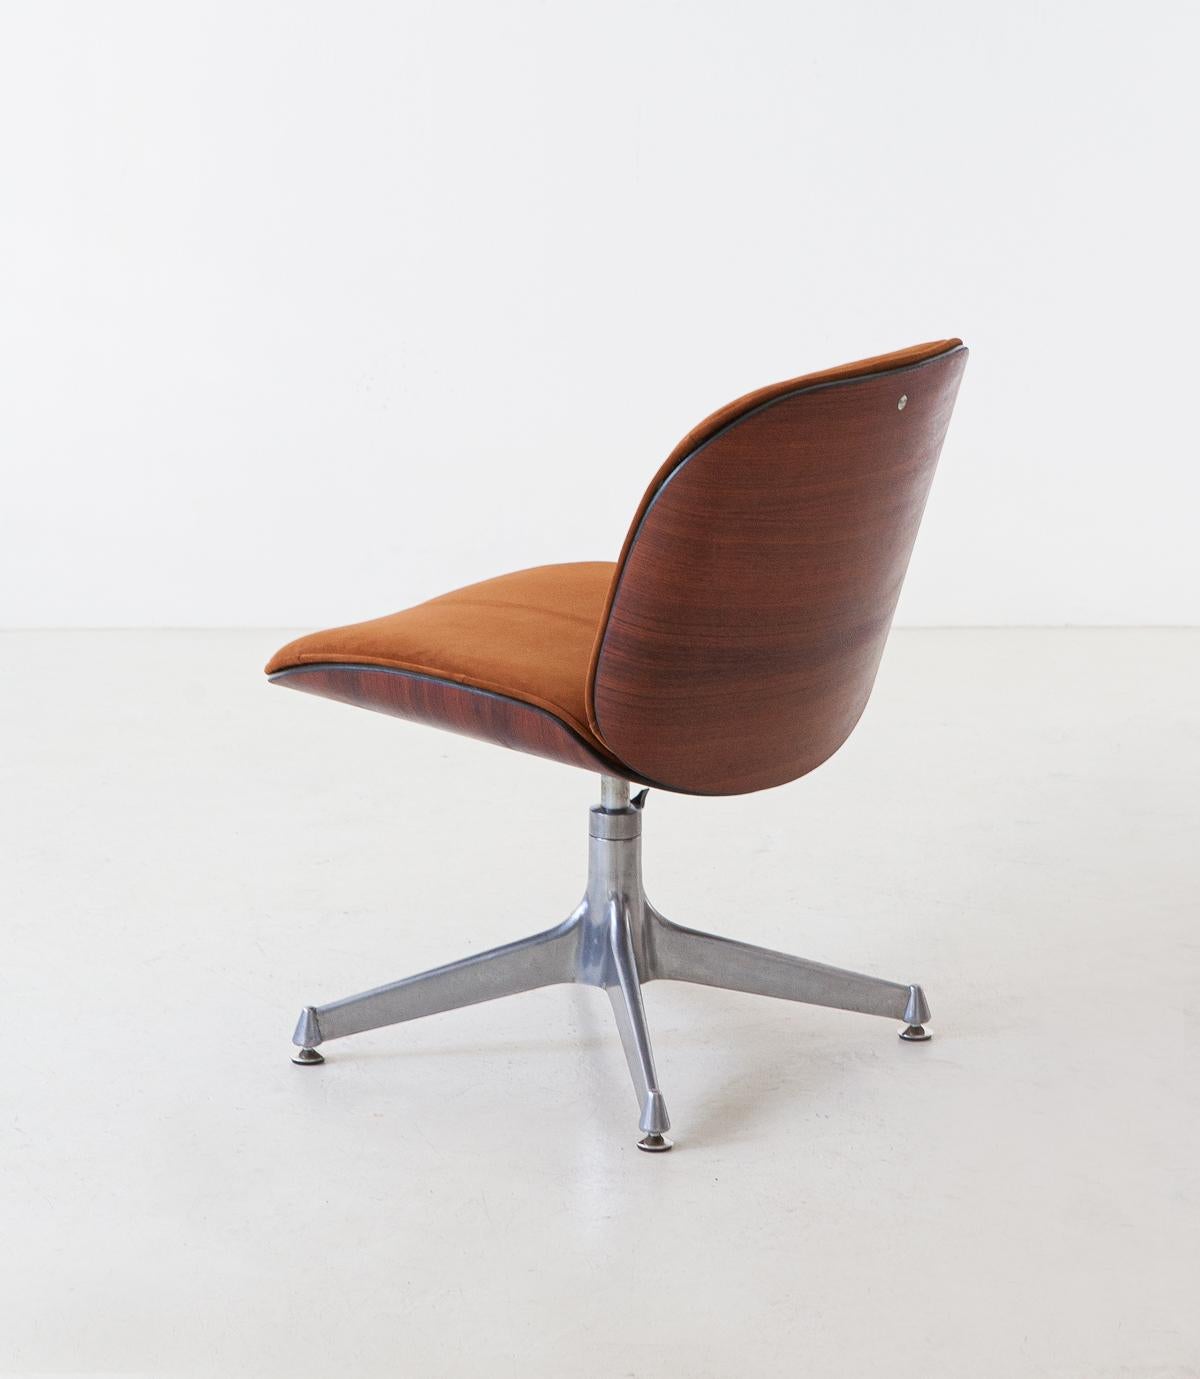 Italian 1950s Fully Restored Rosewood and Leather Desk Chair by Ico Parisi for MIM